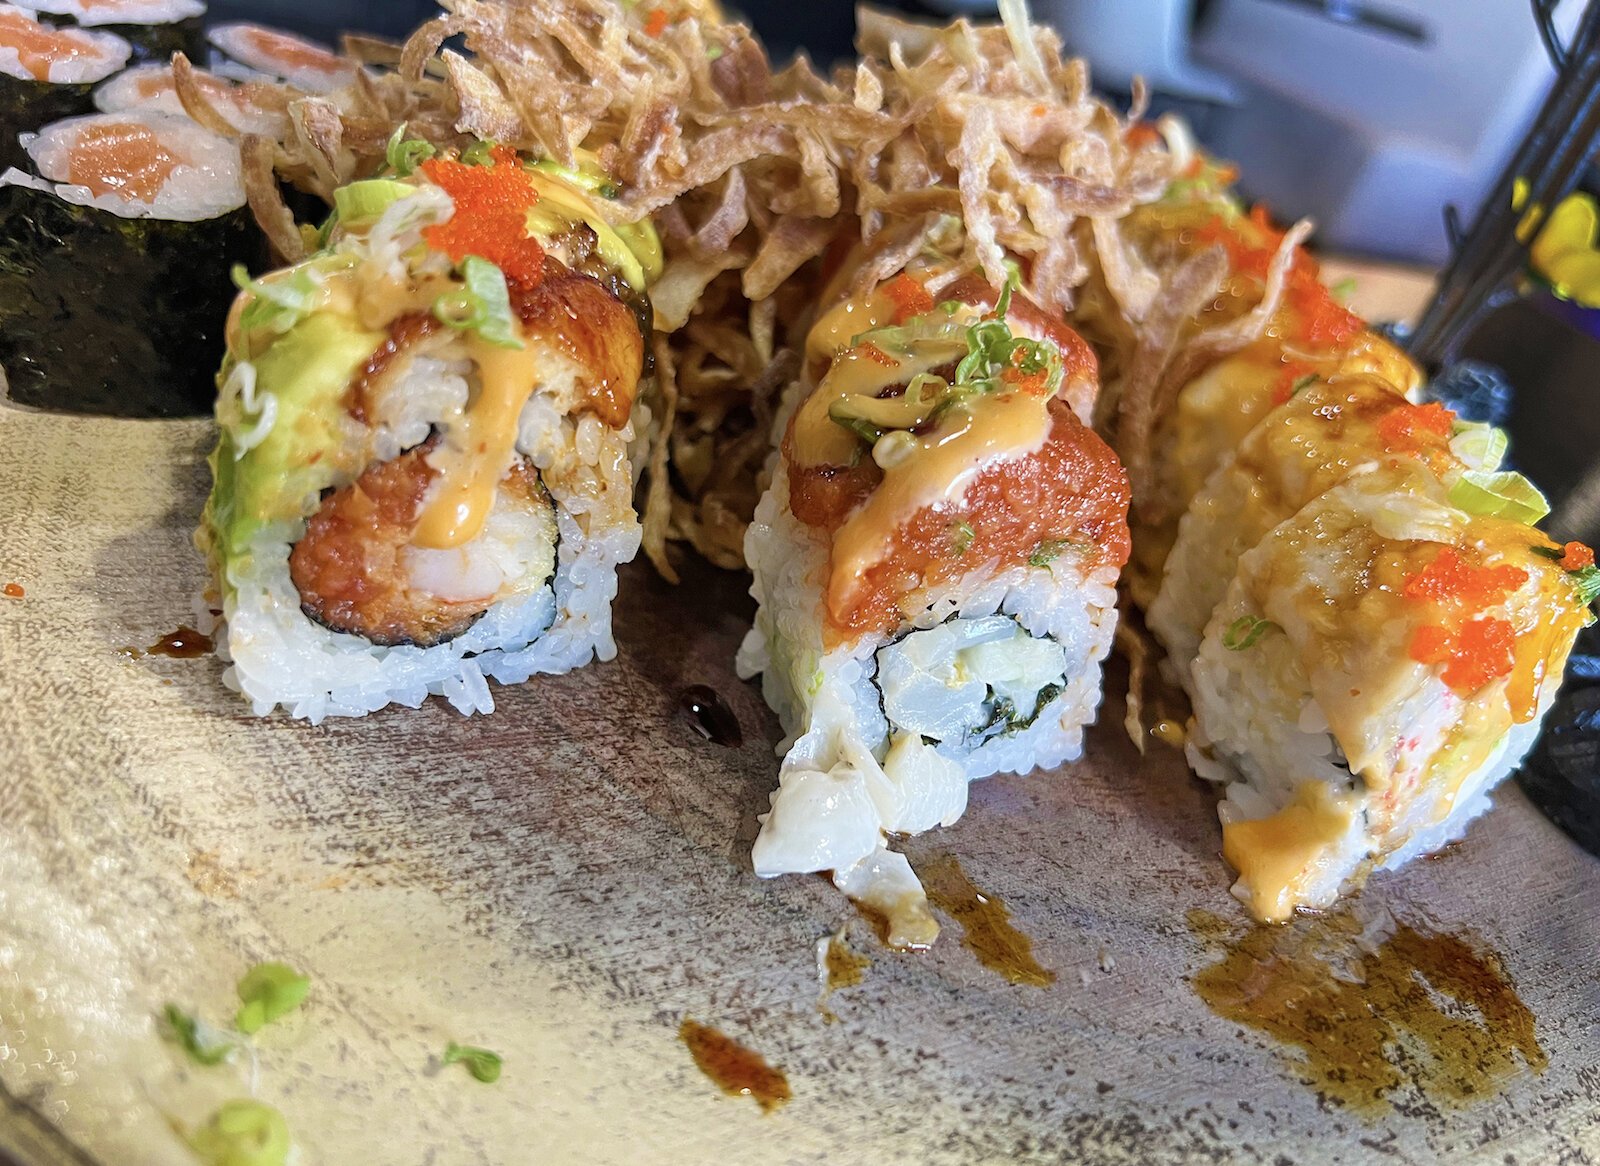 I order three of some of their most popular rolls, from left to right, the playboy, the scallop lover, and the samurai.